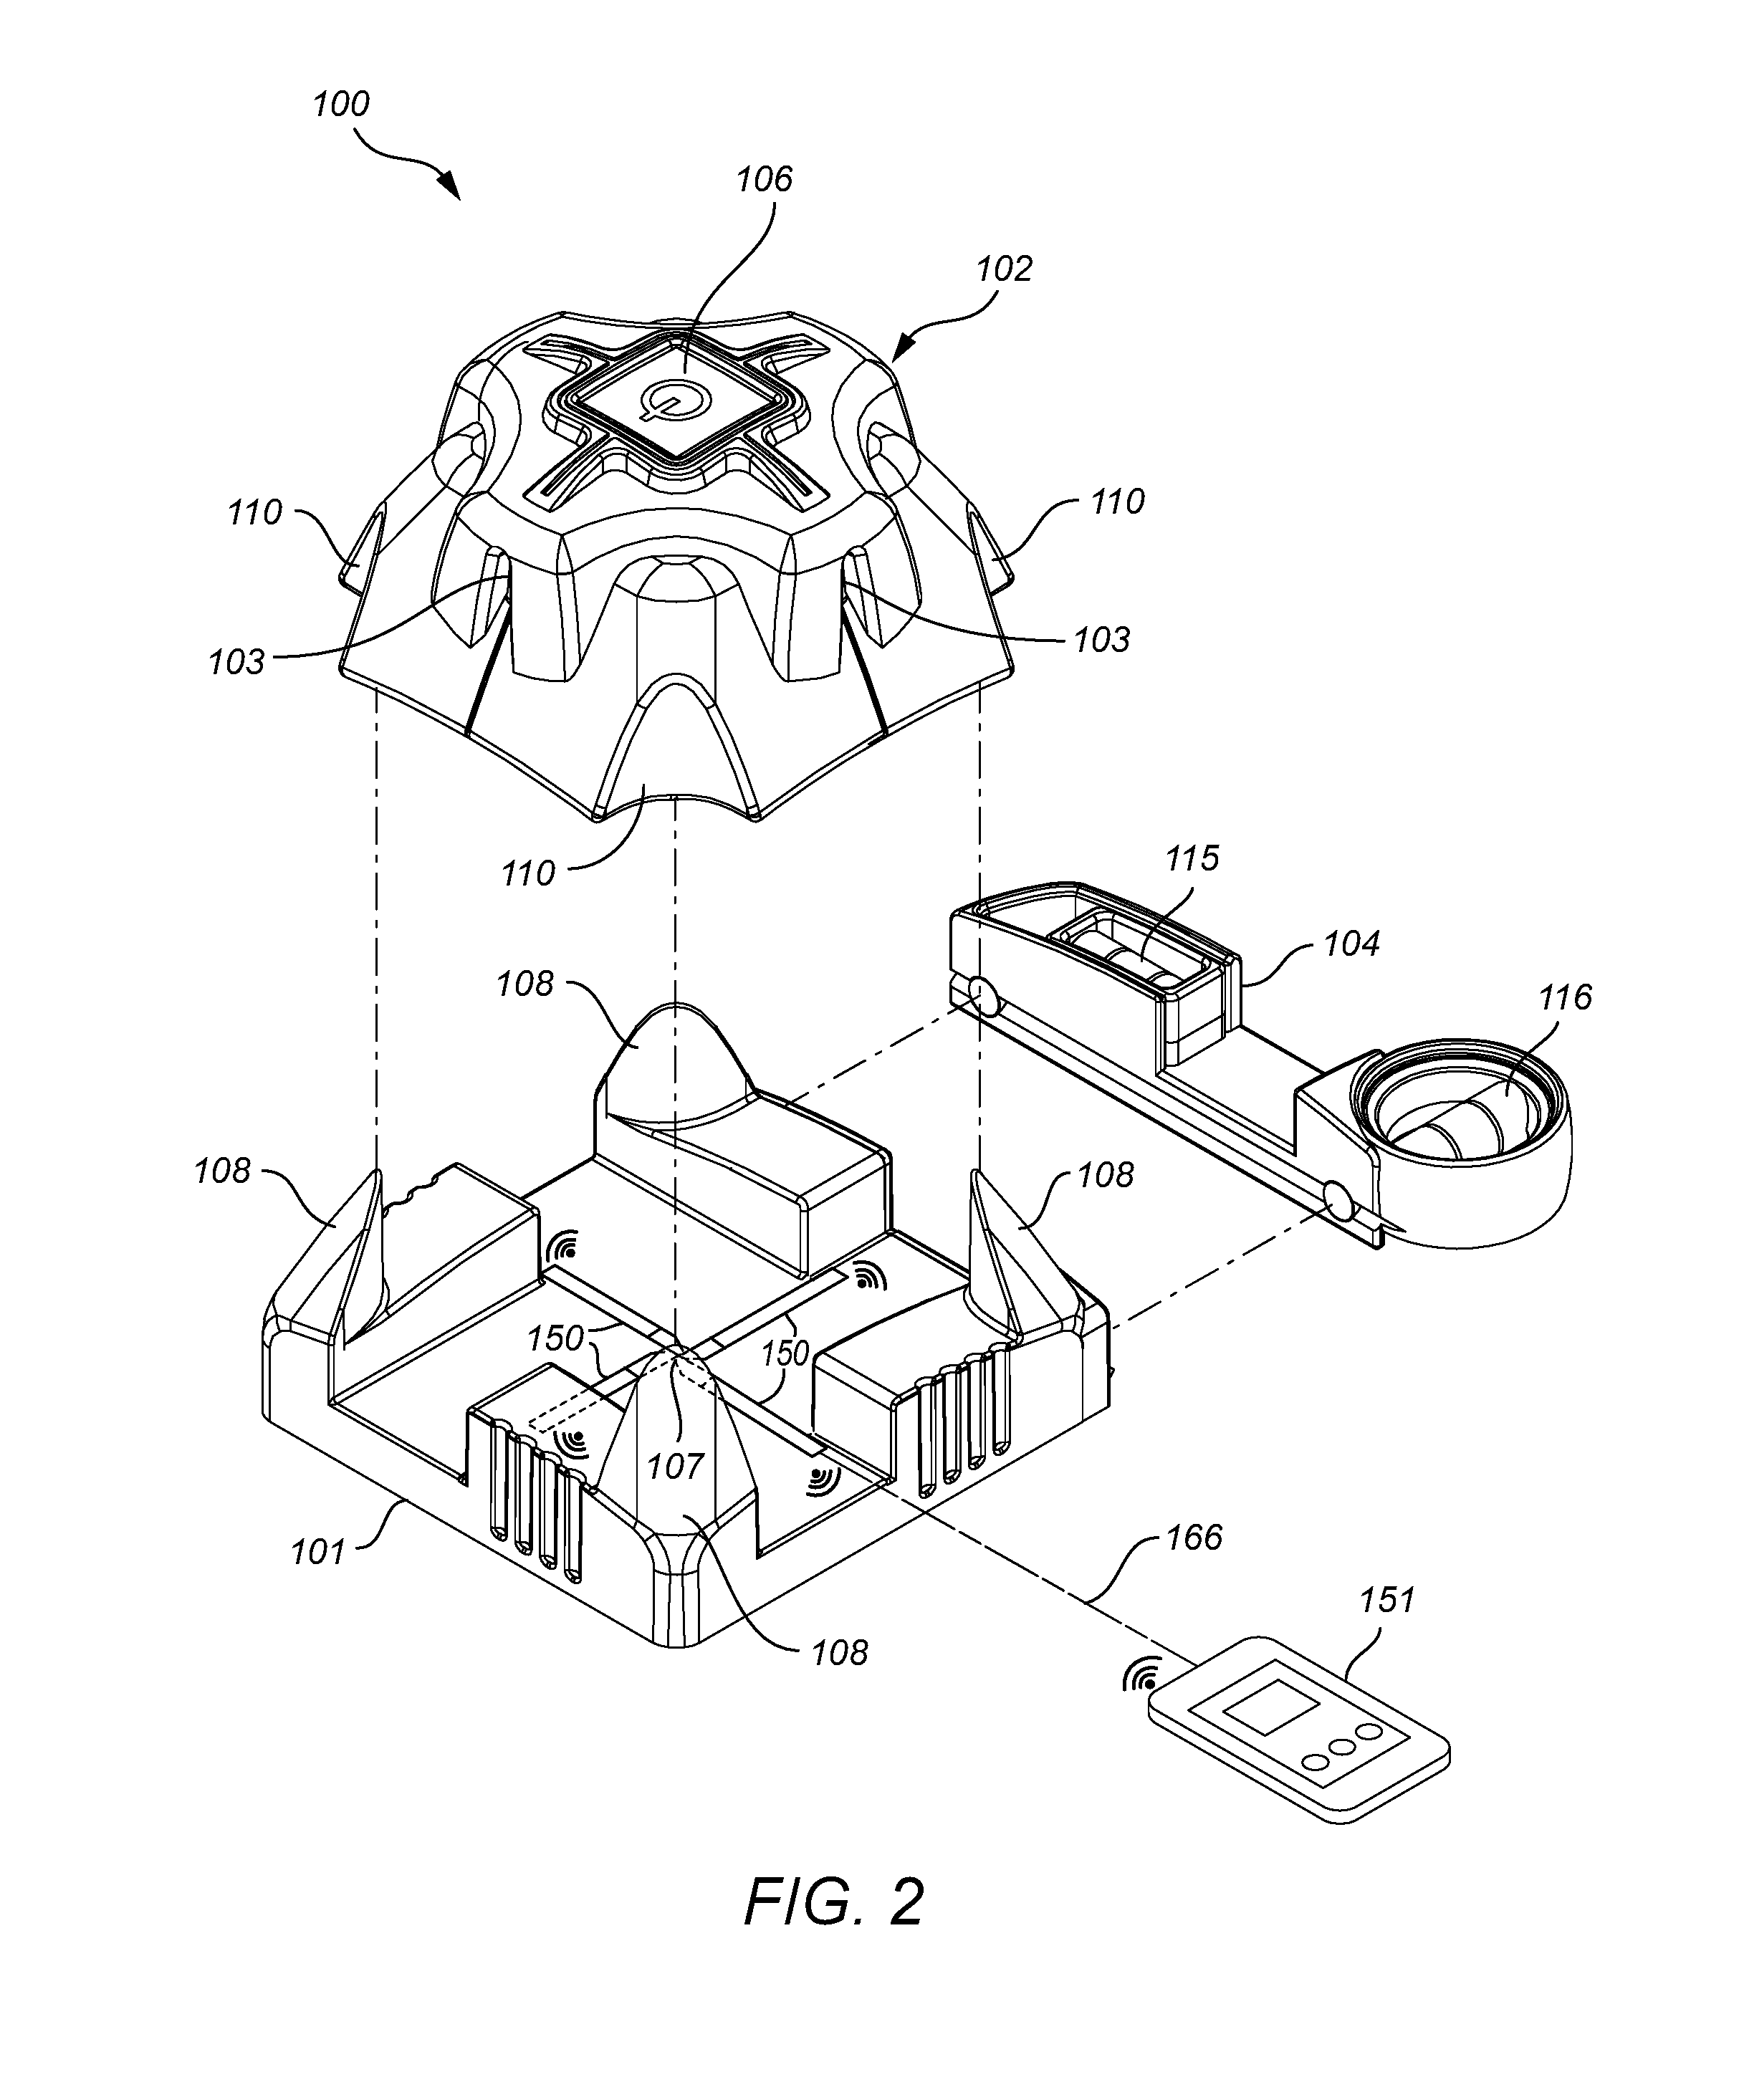 Adjustable laser leveling device with distance measuring lasers and self-leveling lasers and related method